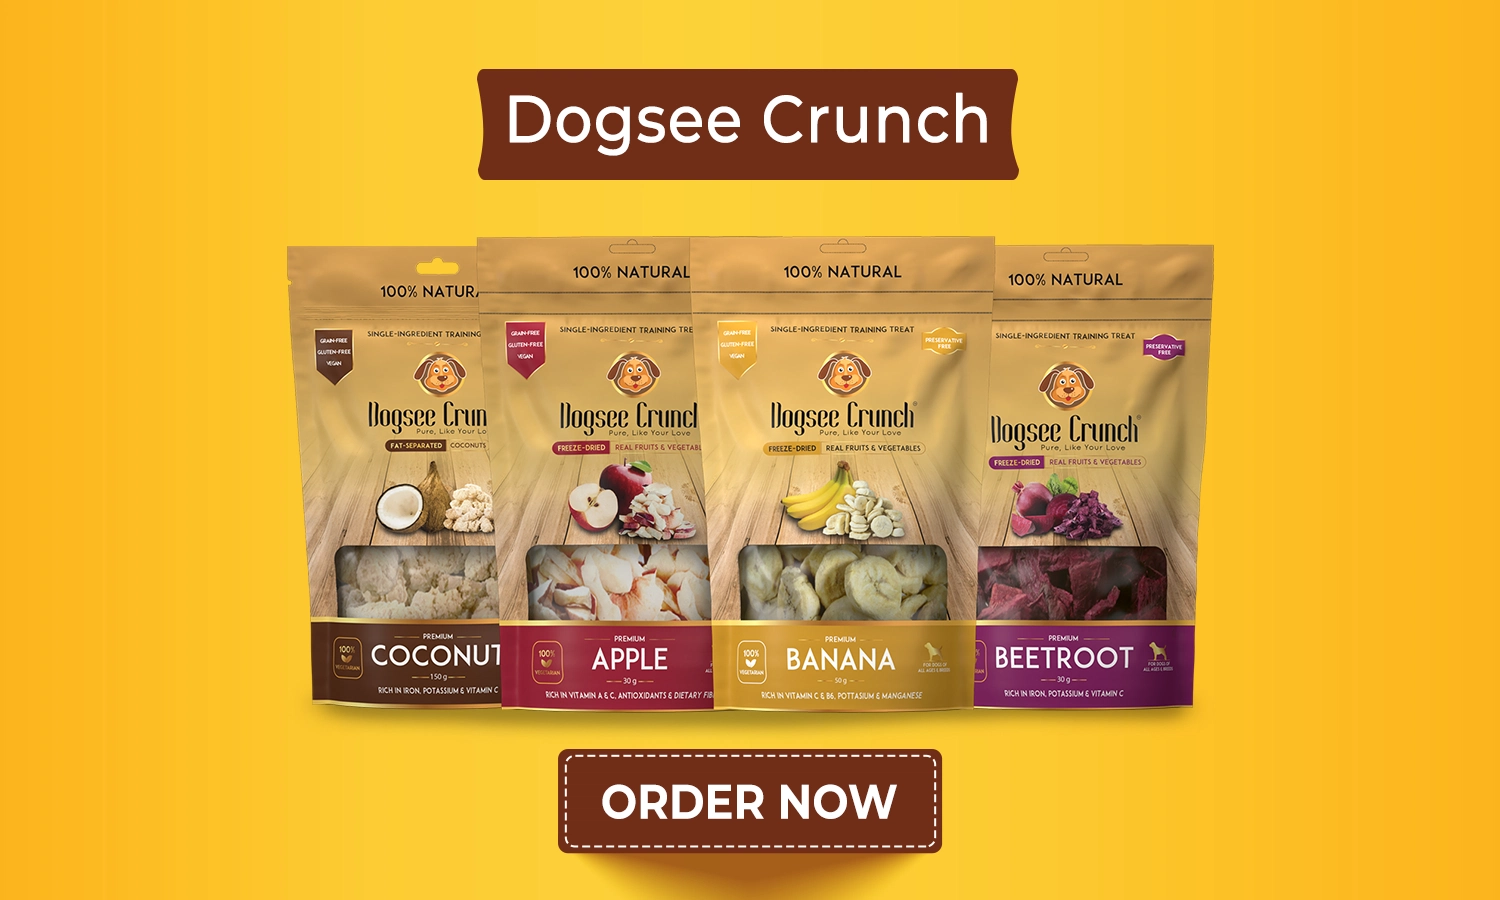 Dogsee Crunch